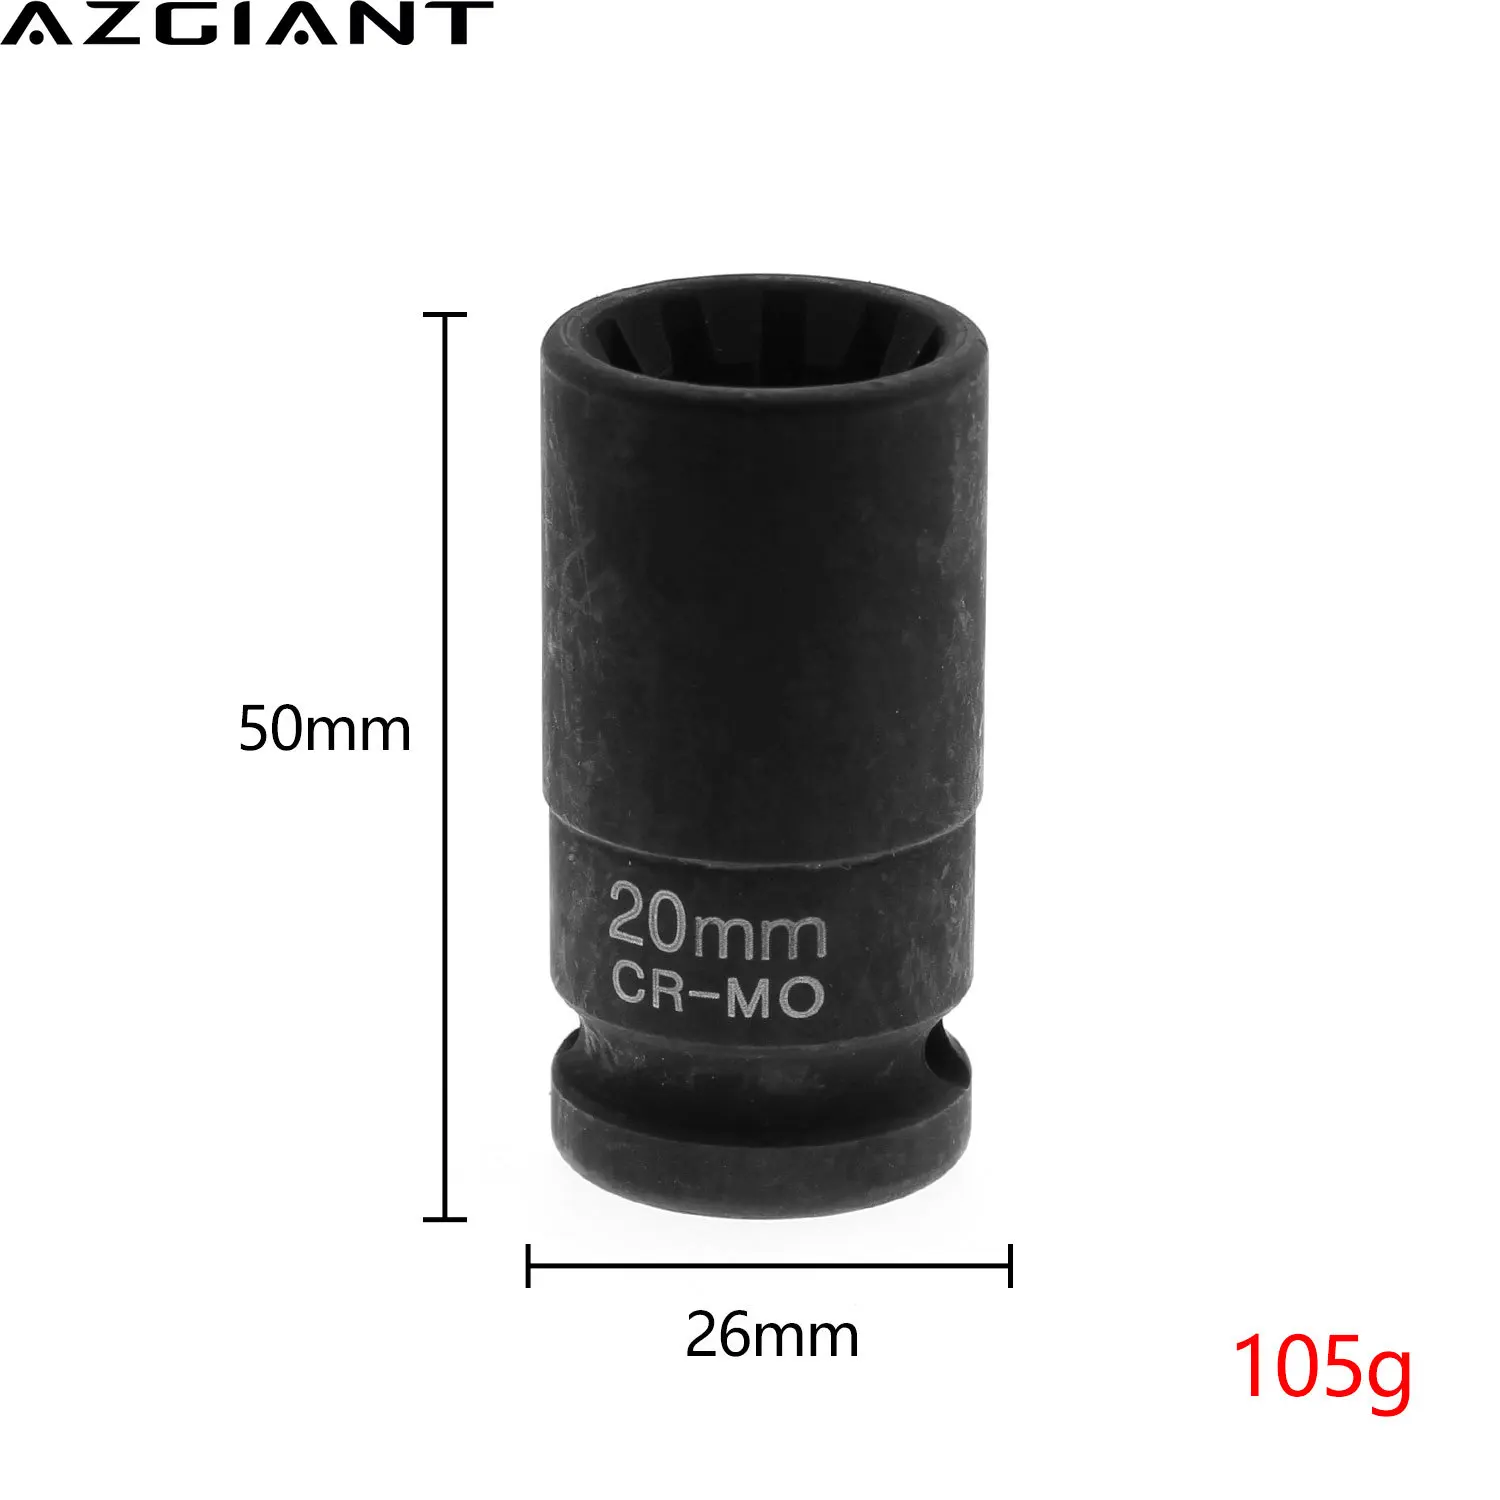 

AZGIANT Brake Caliper Pad Screw Disassembly Removal Tool for Porsche Cayenne Audi A8 S6 VW New Touareg Q7 10T Angle 20mm